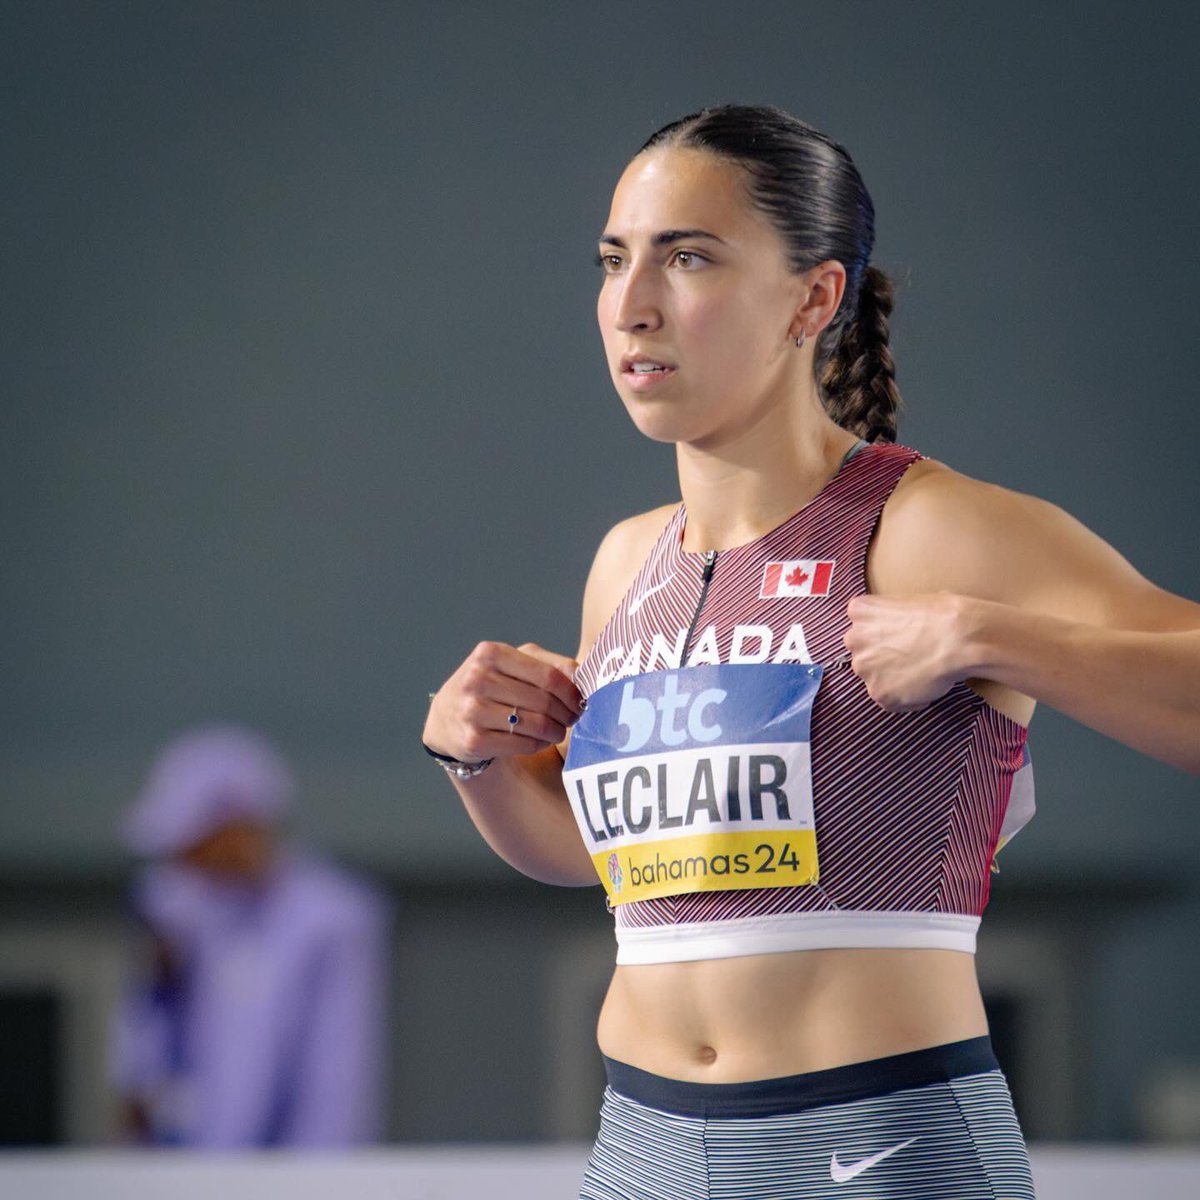 In the Women’s 4x100 Final, Team 🇨🇦’s quartet of McCreath, LeClair, LeDuc & Ntambue finish 7th with a time of 43.09s 👏 After earning an Olympic qualification yesterday we will see 🇨🇦 compete in the Women’s 4x100 Relays at Paris 2024 this summer! 📸: Kenny Zhong